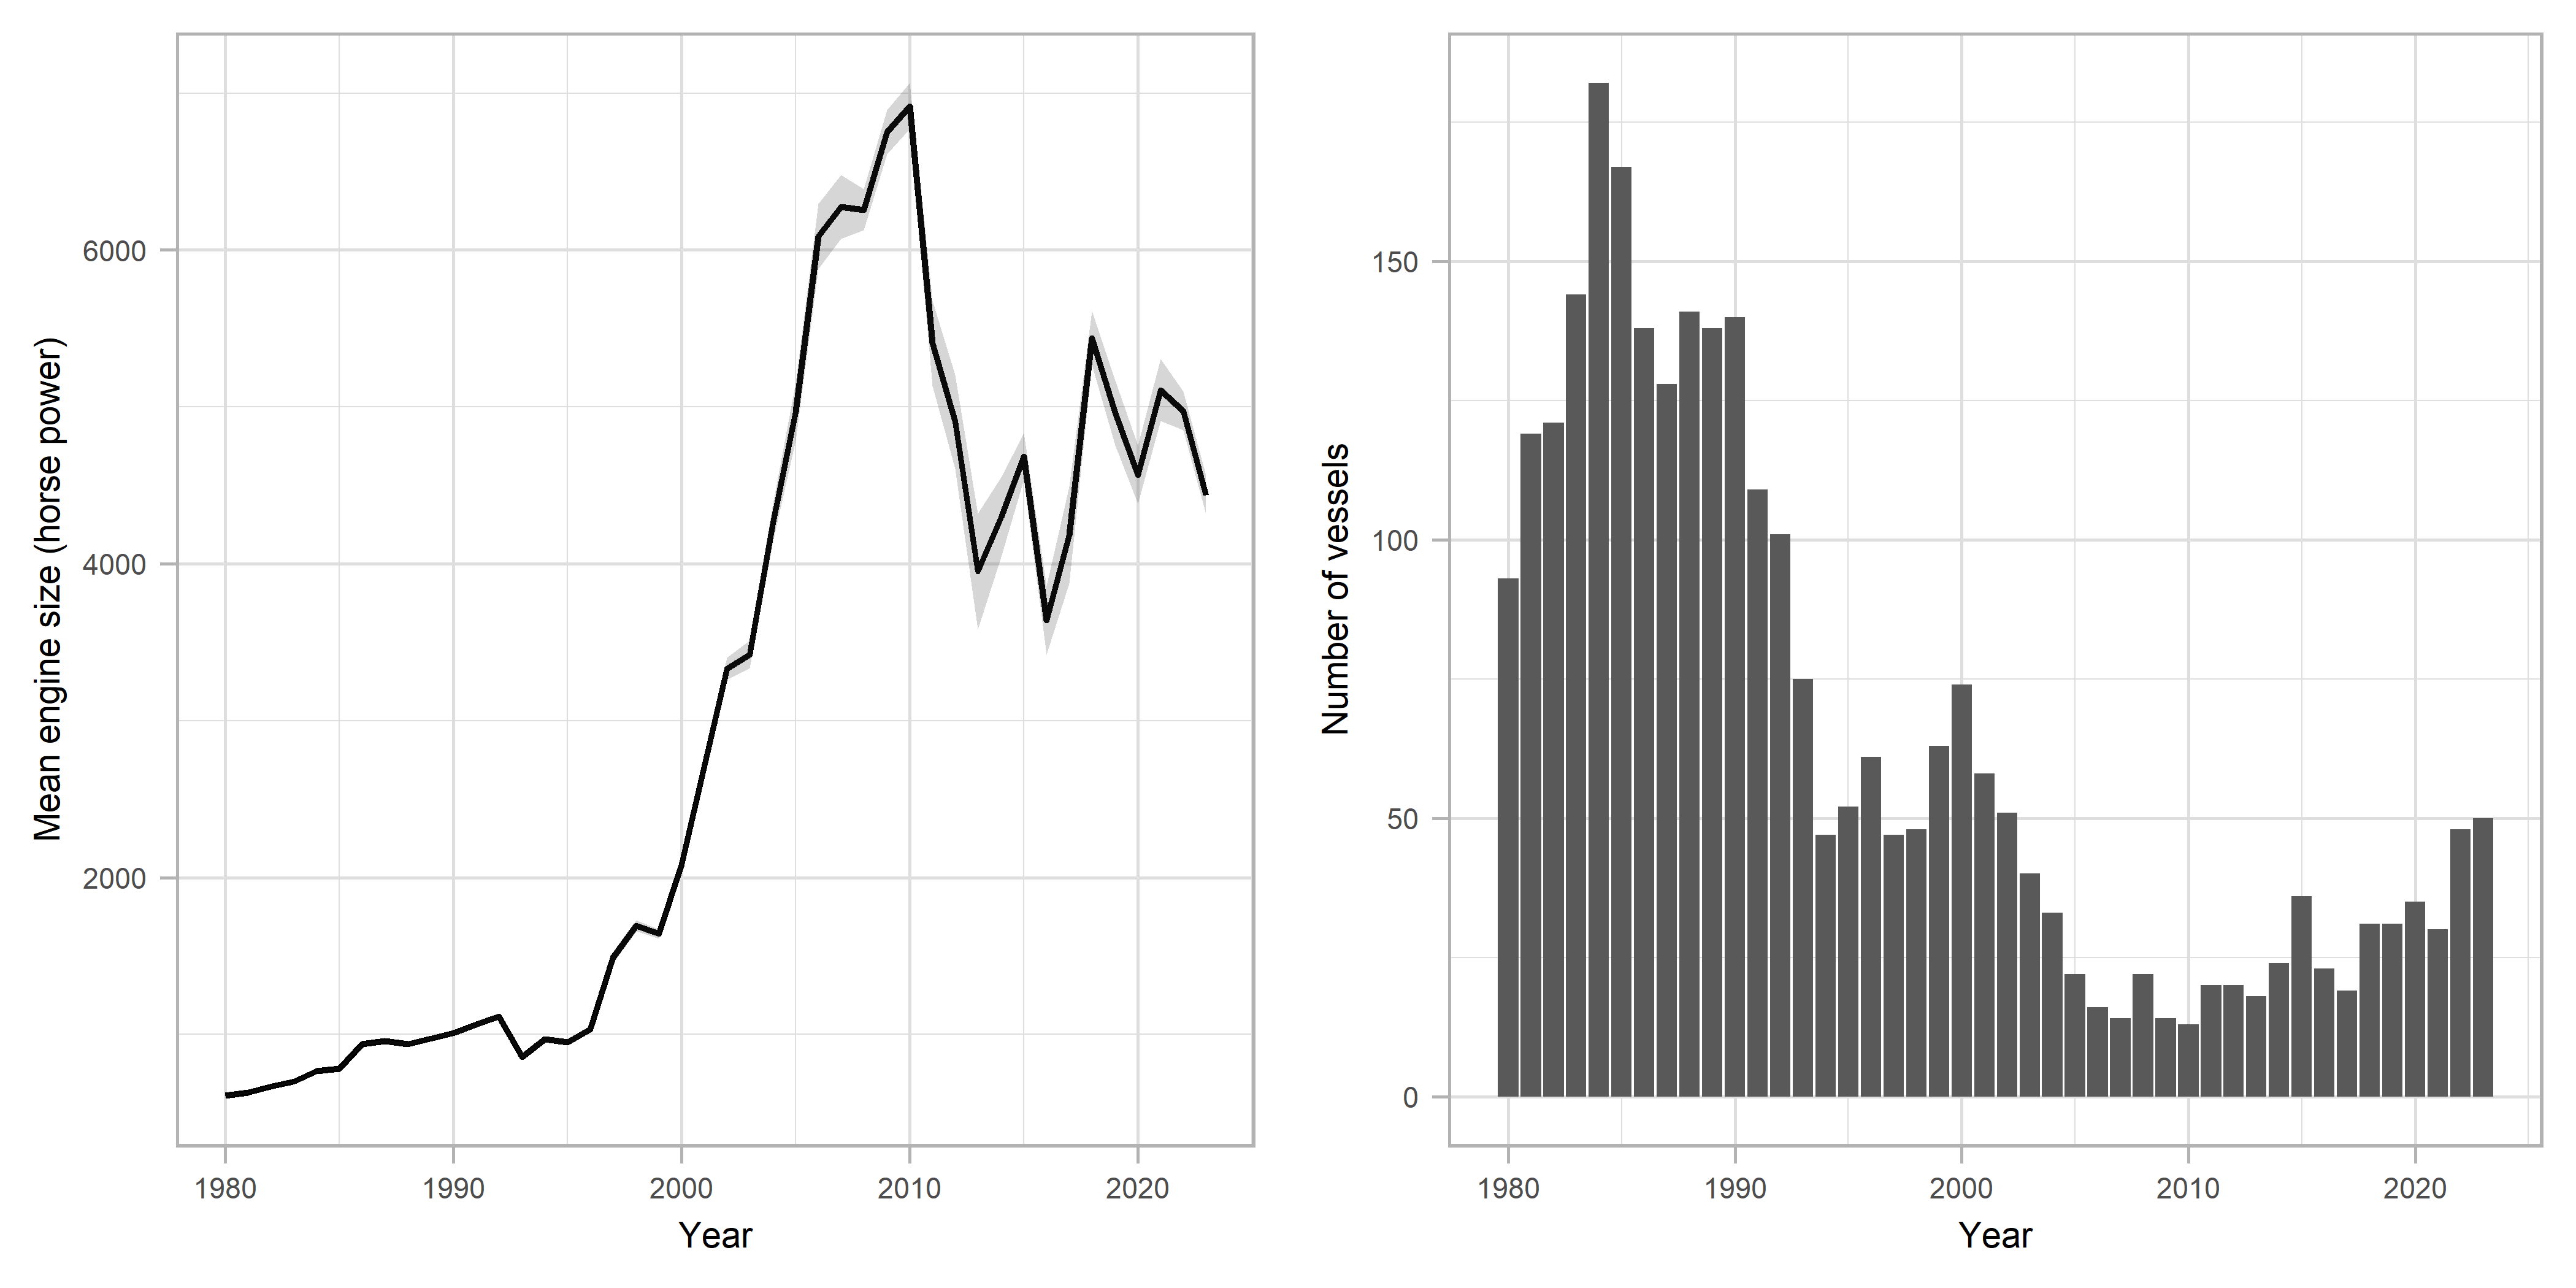 Figure 2: Mean engine power (HP) weighted by trawl-time (left) and number of vessels (right) in Norwegian fleet. Data are based on logbook registrations.